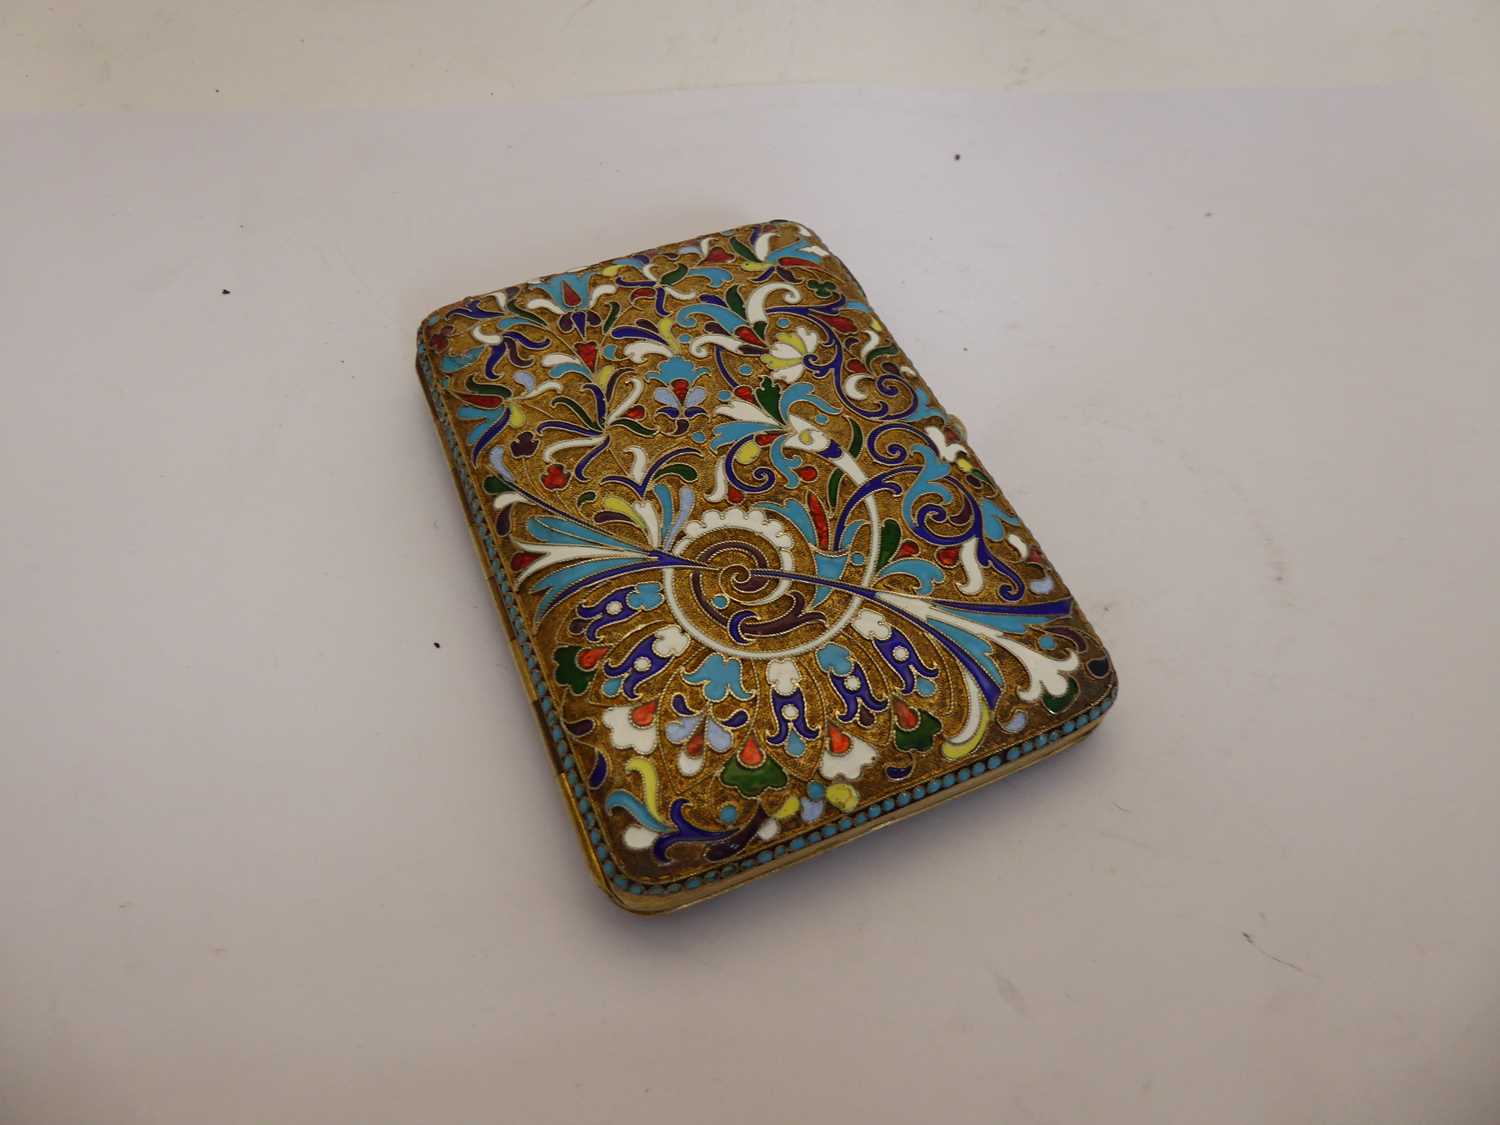 A Russian Silver-Gilt and Enamel Cigarette-Case, by Nicholai Zugeryev, Moscow, 1898-1914, Assay Mas - Image 3 of 6